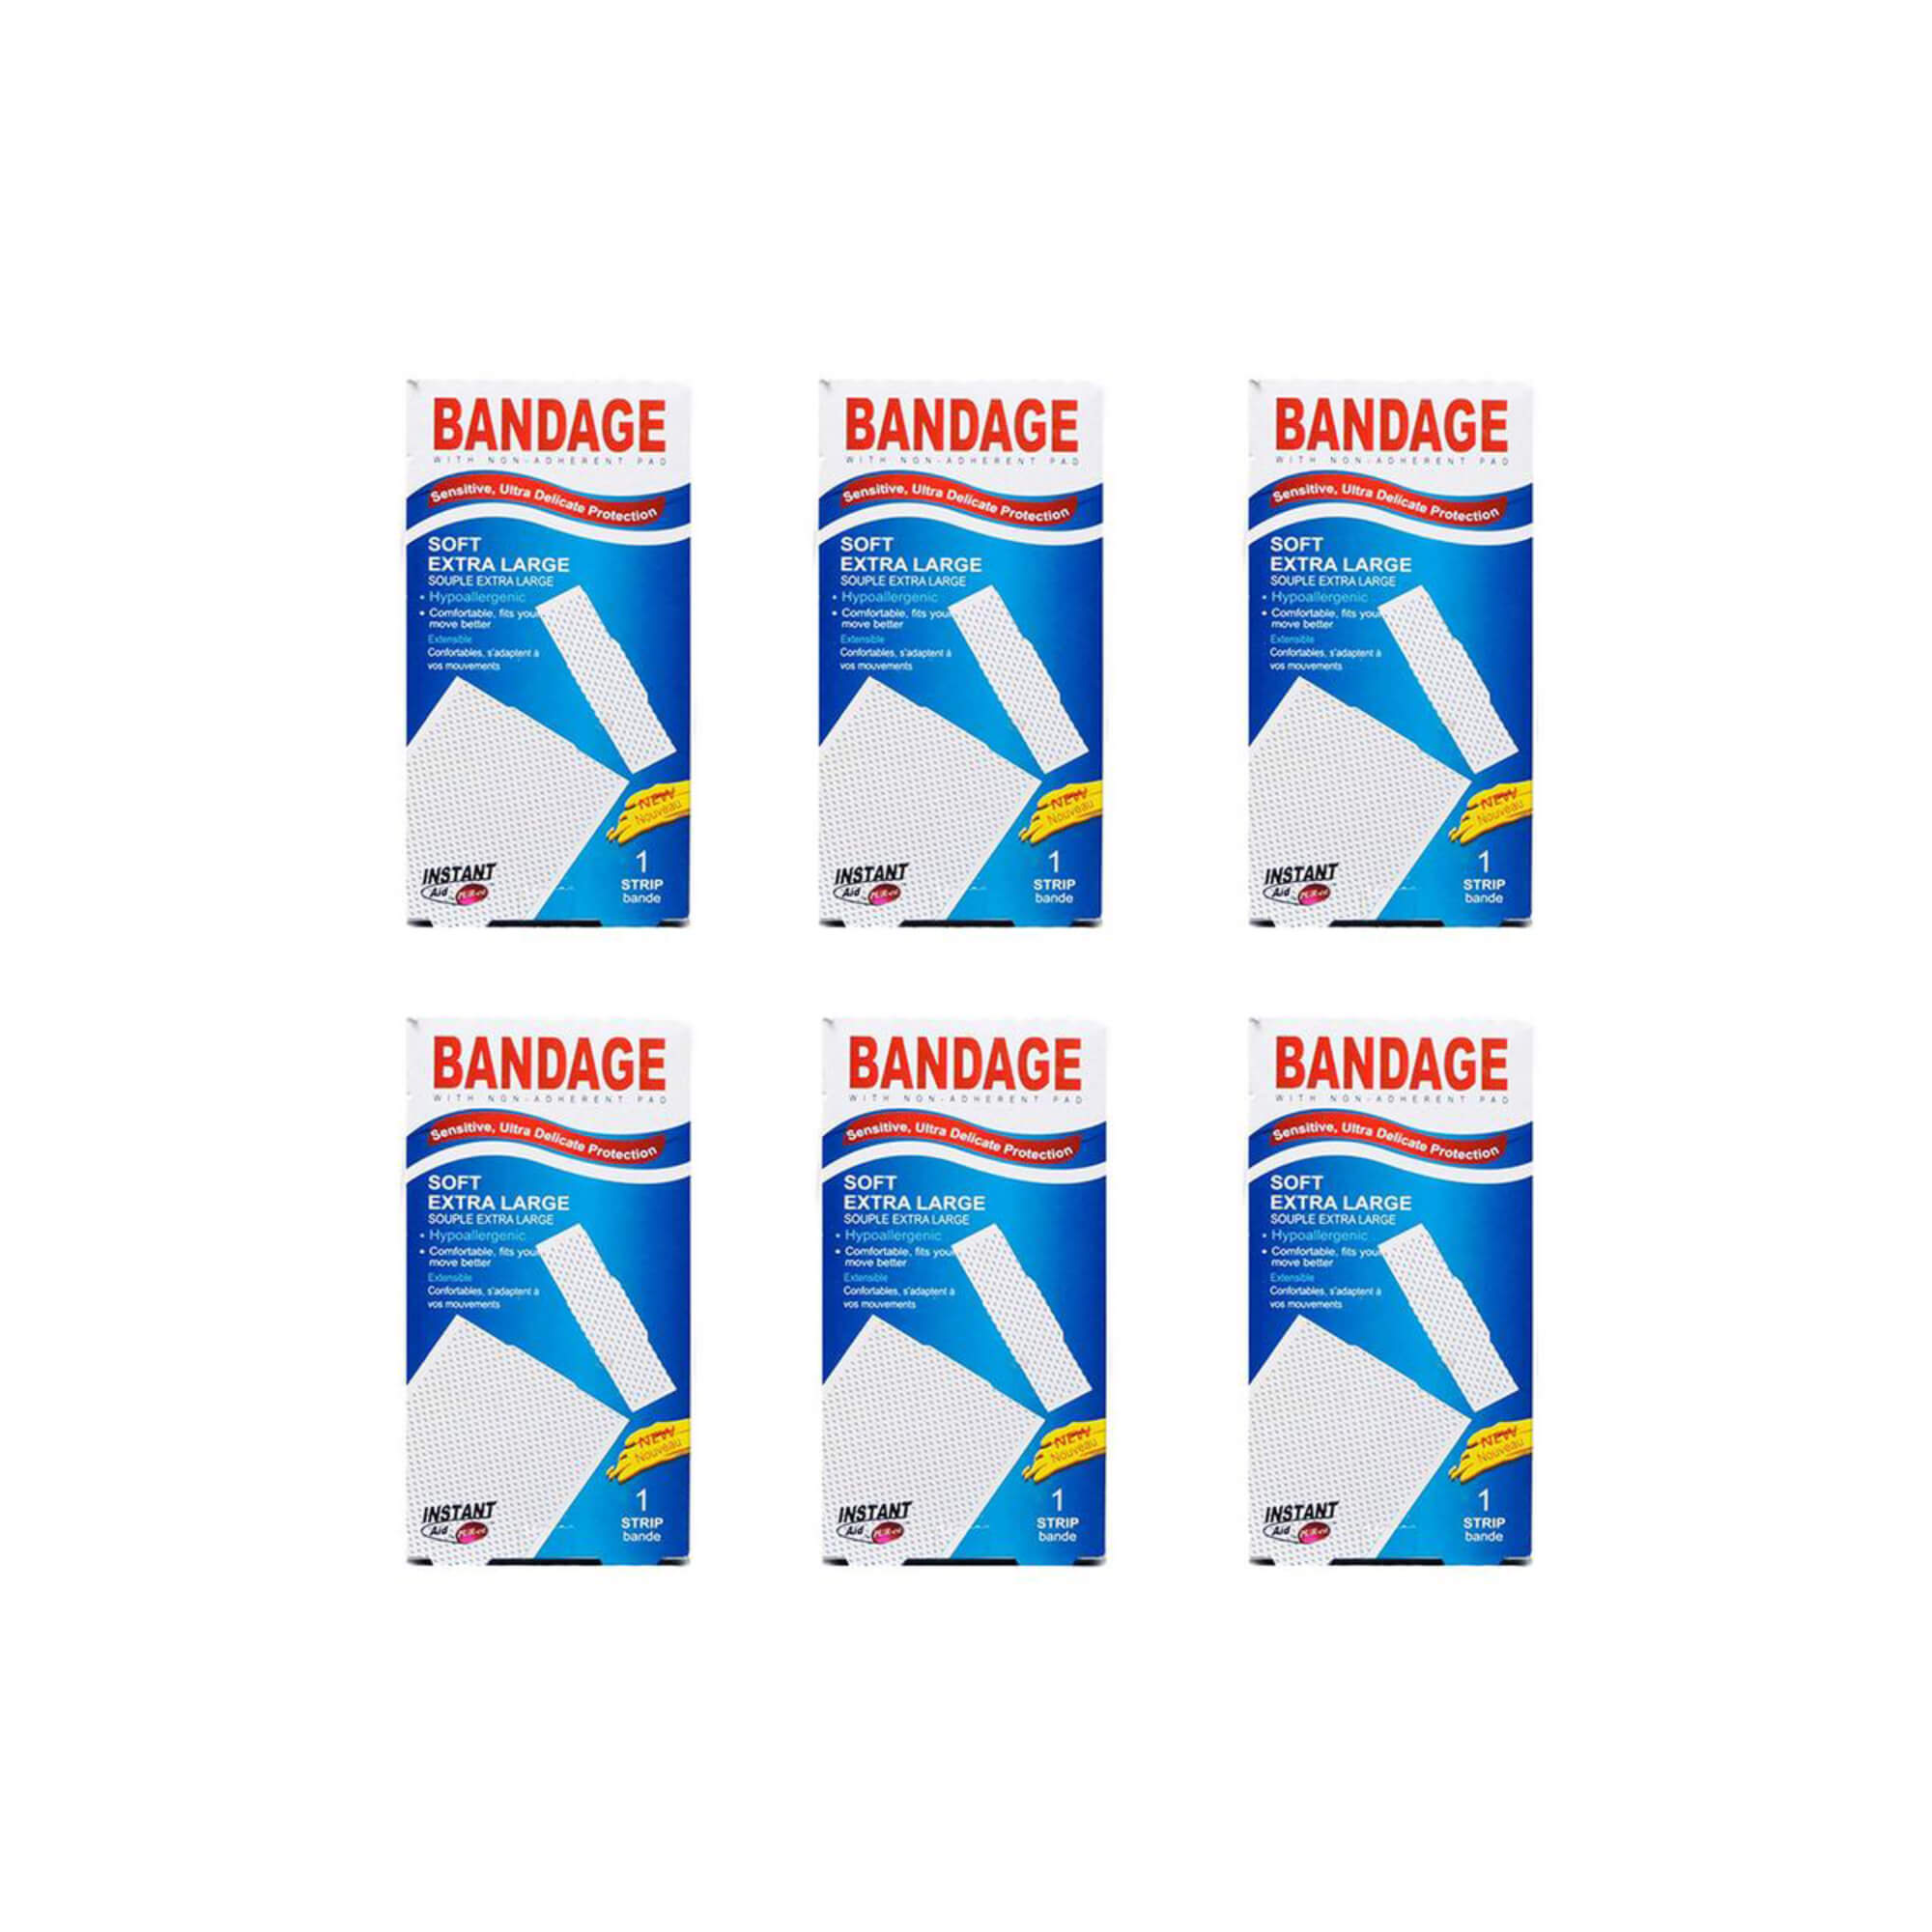 Purest Soft Extra Large Bandage, 1 Strip in 1 Pk, Pack of 6